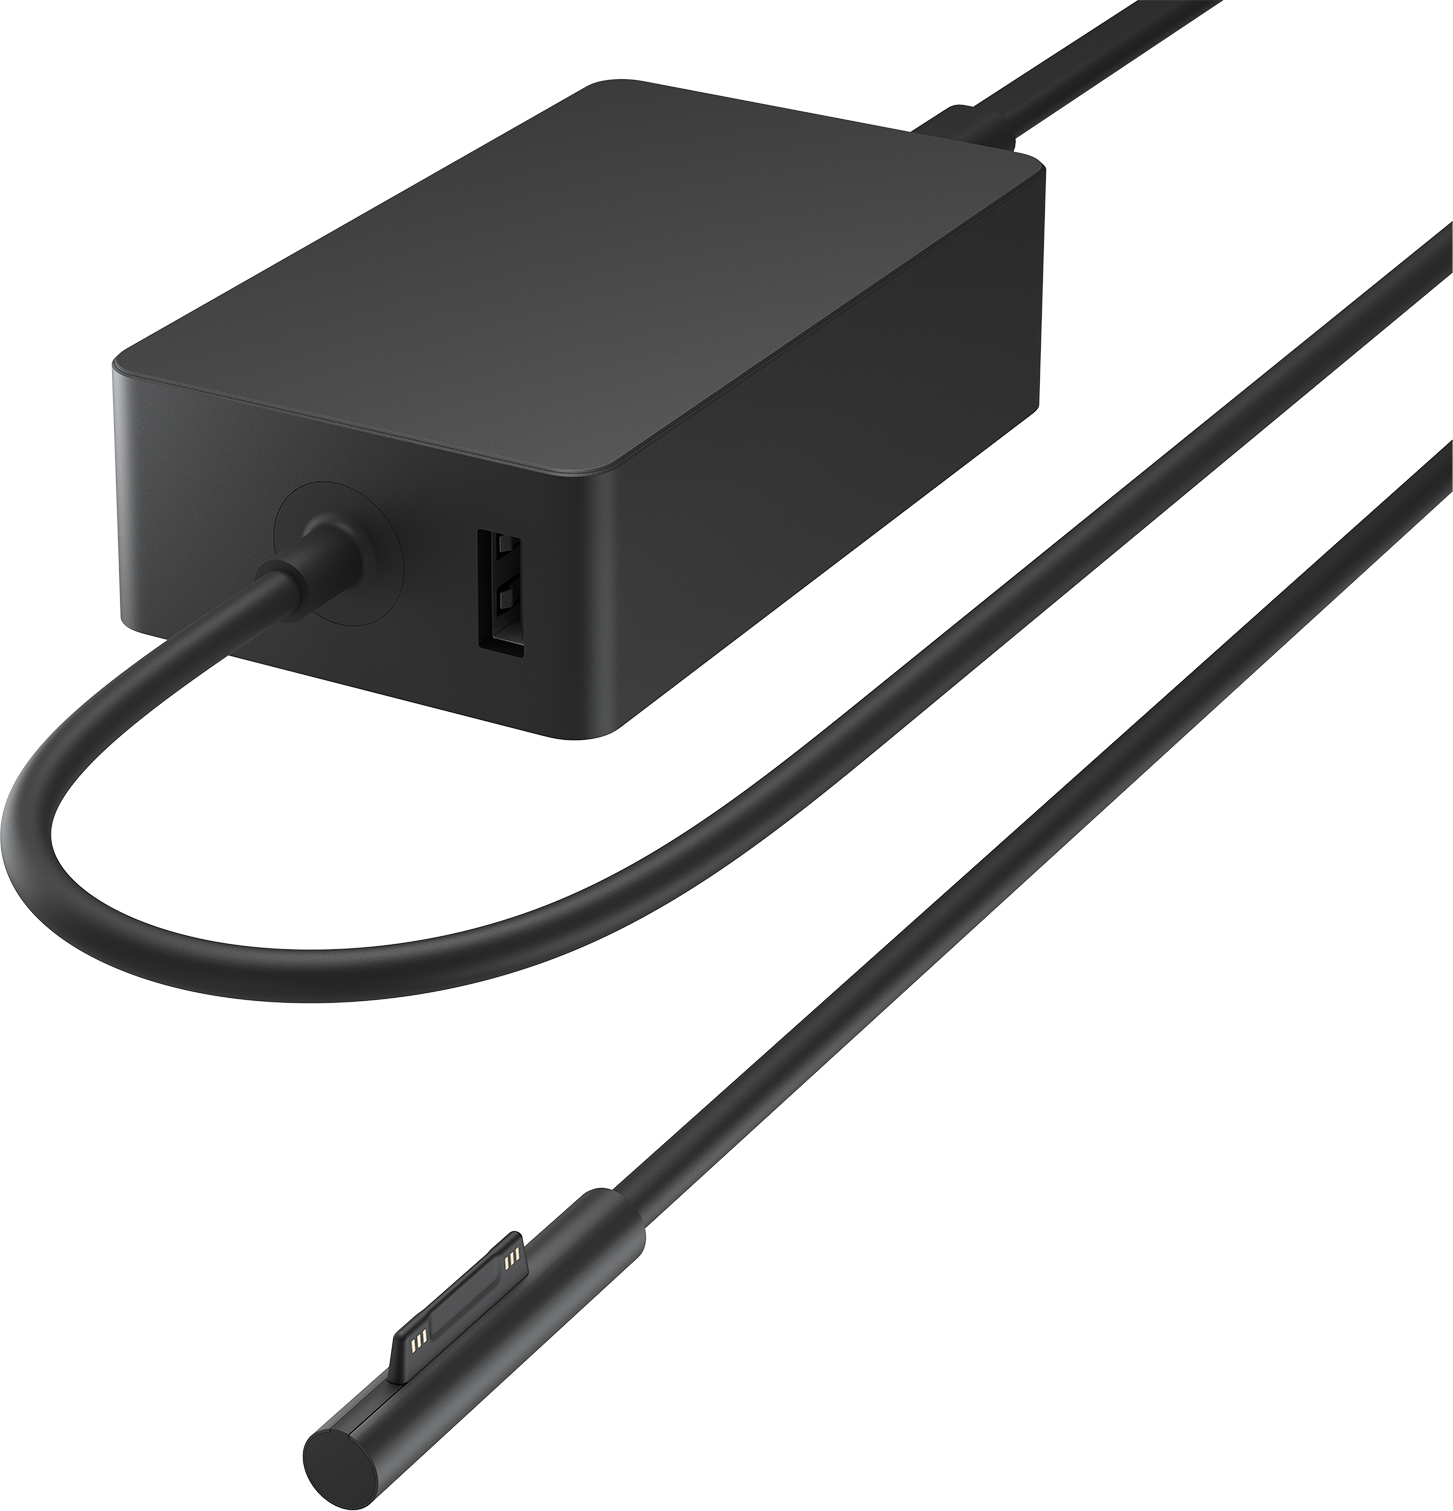 Microsoft Band 1 USB Power Charger Charging Cable Cord Cradle Station Adapter N 